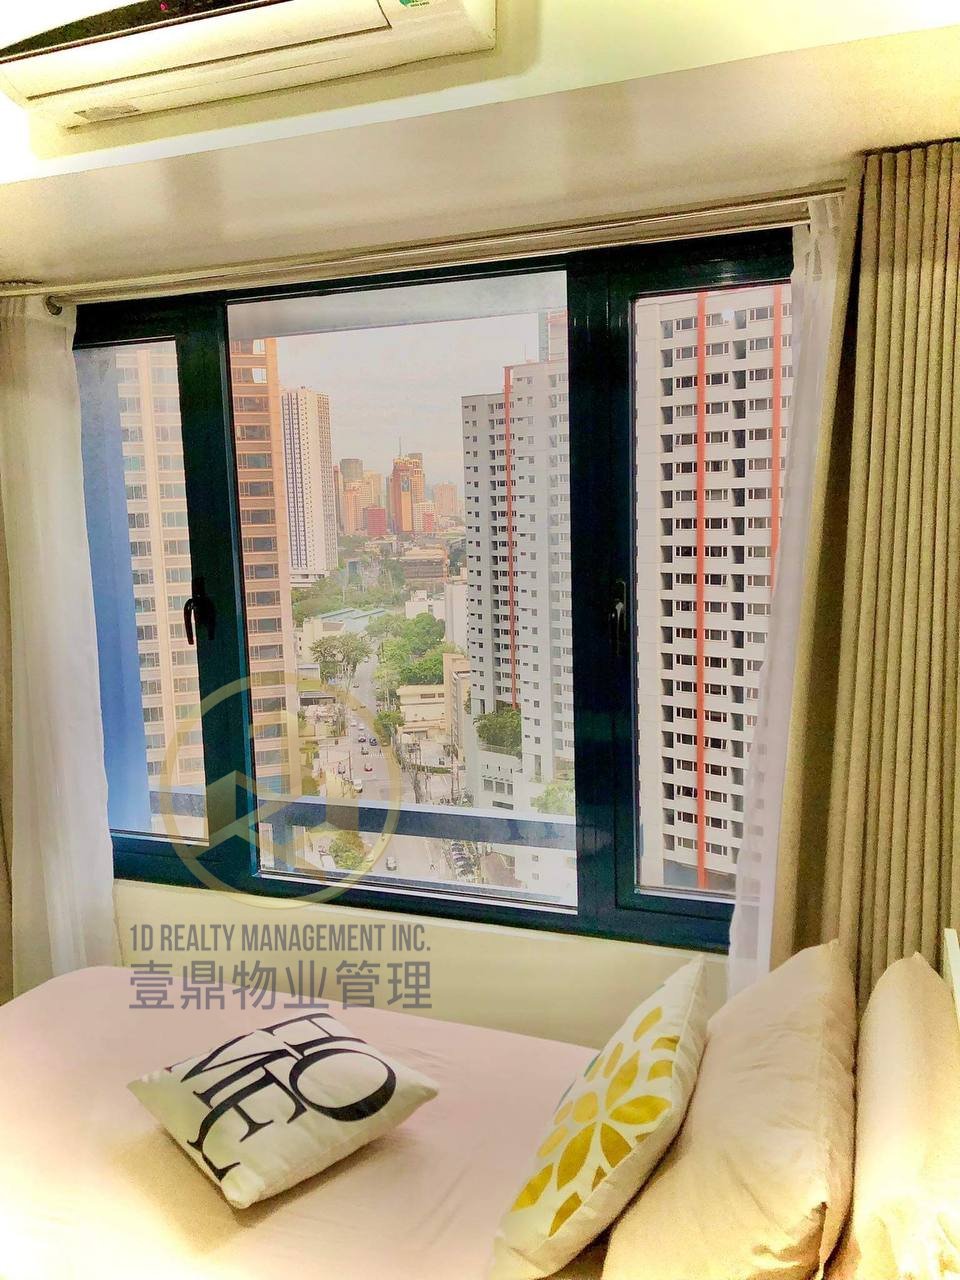 Air Residences Ayala Ave, Makati City - FOR LEASE